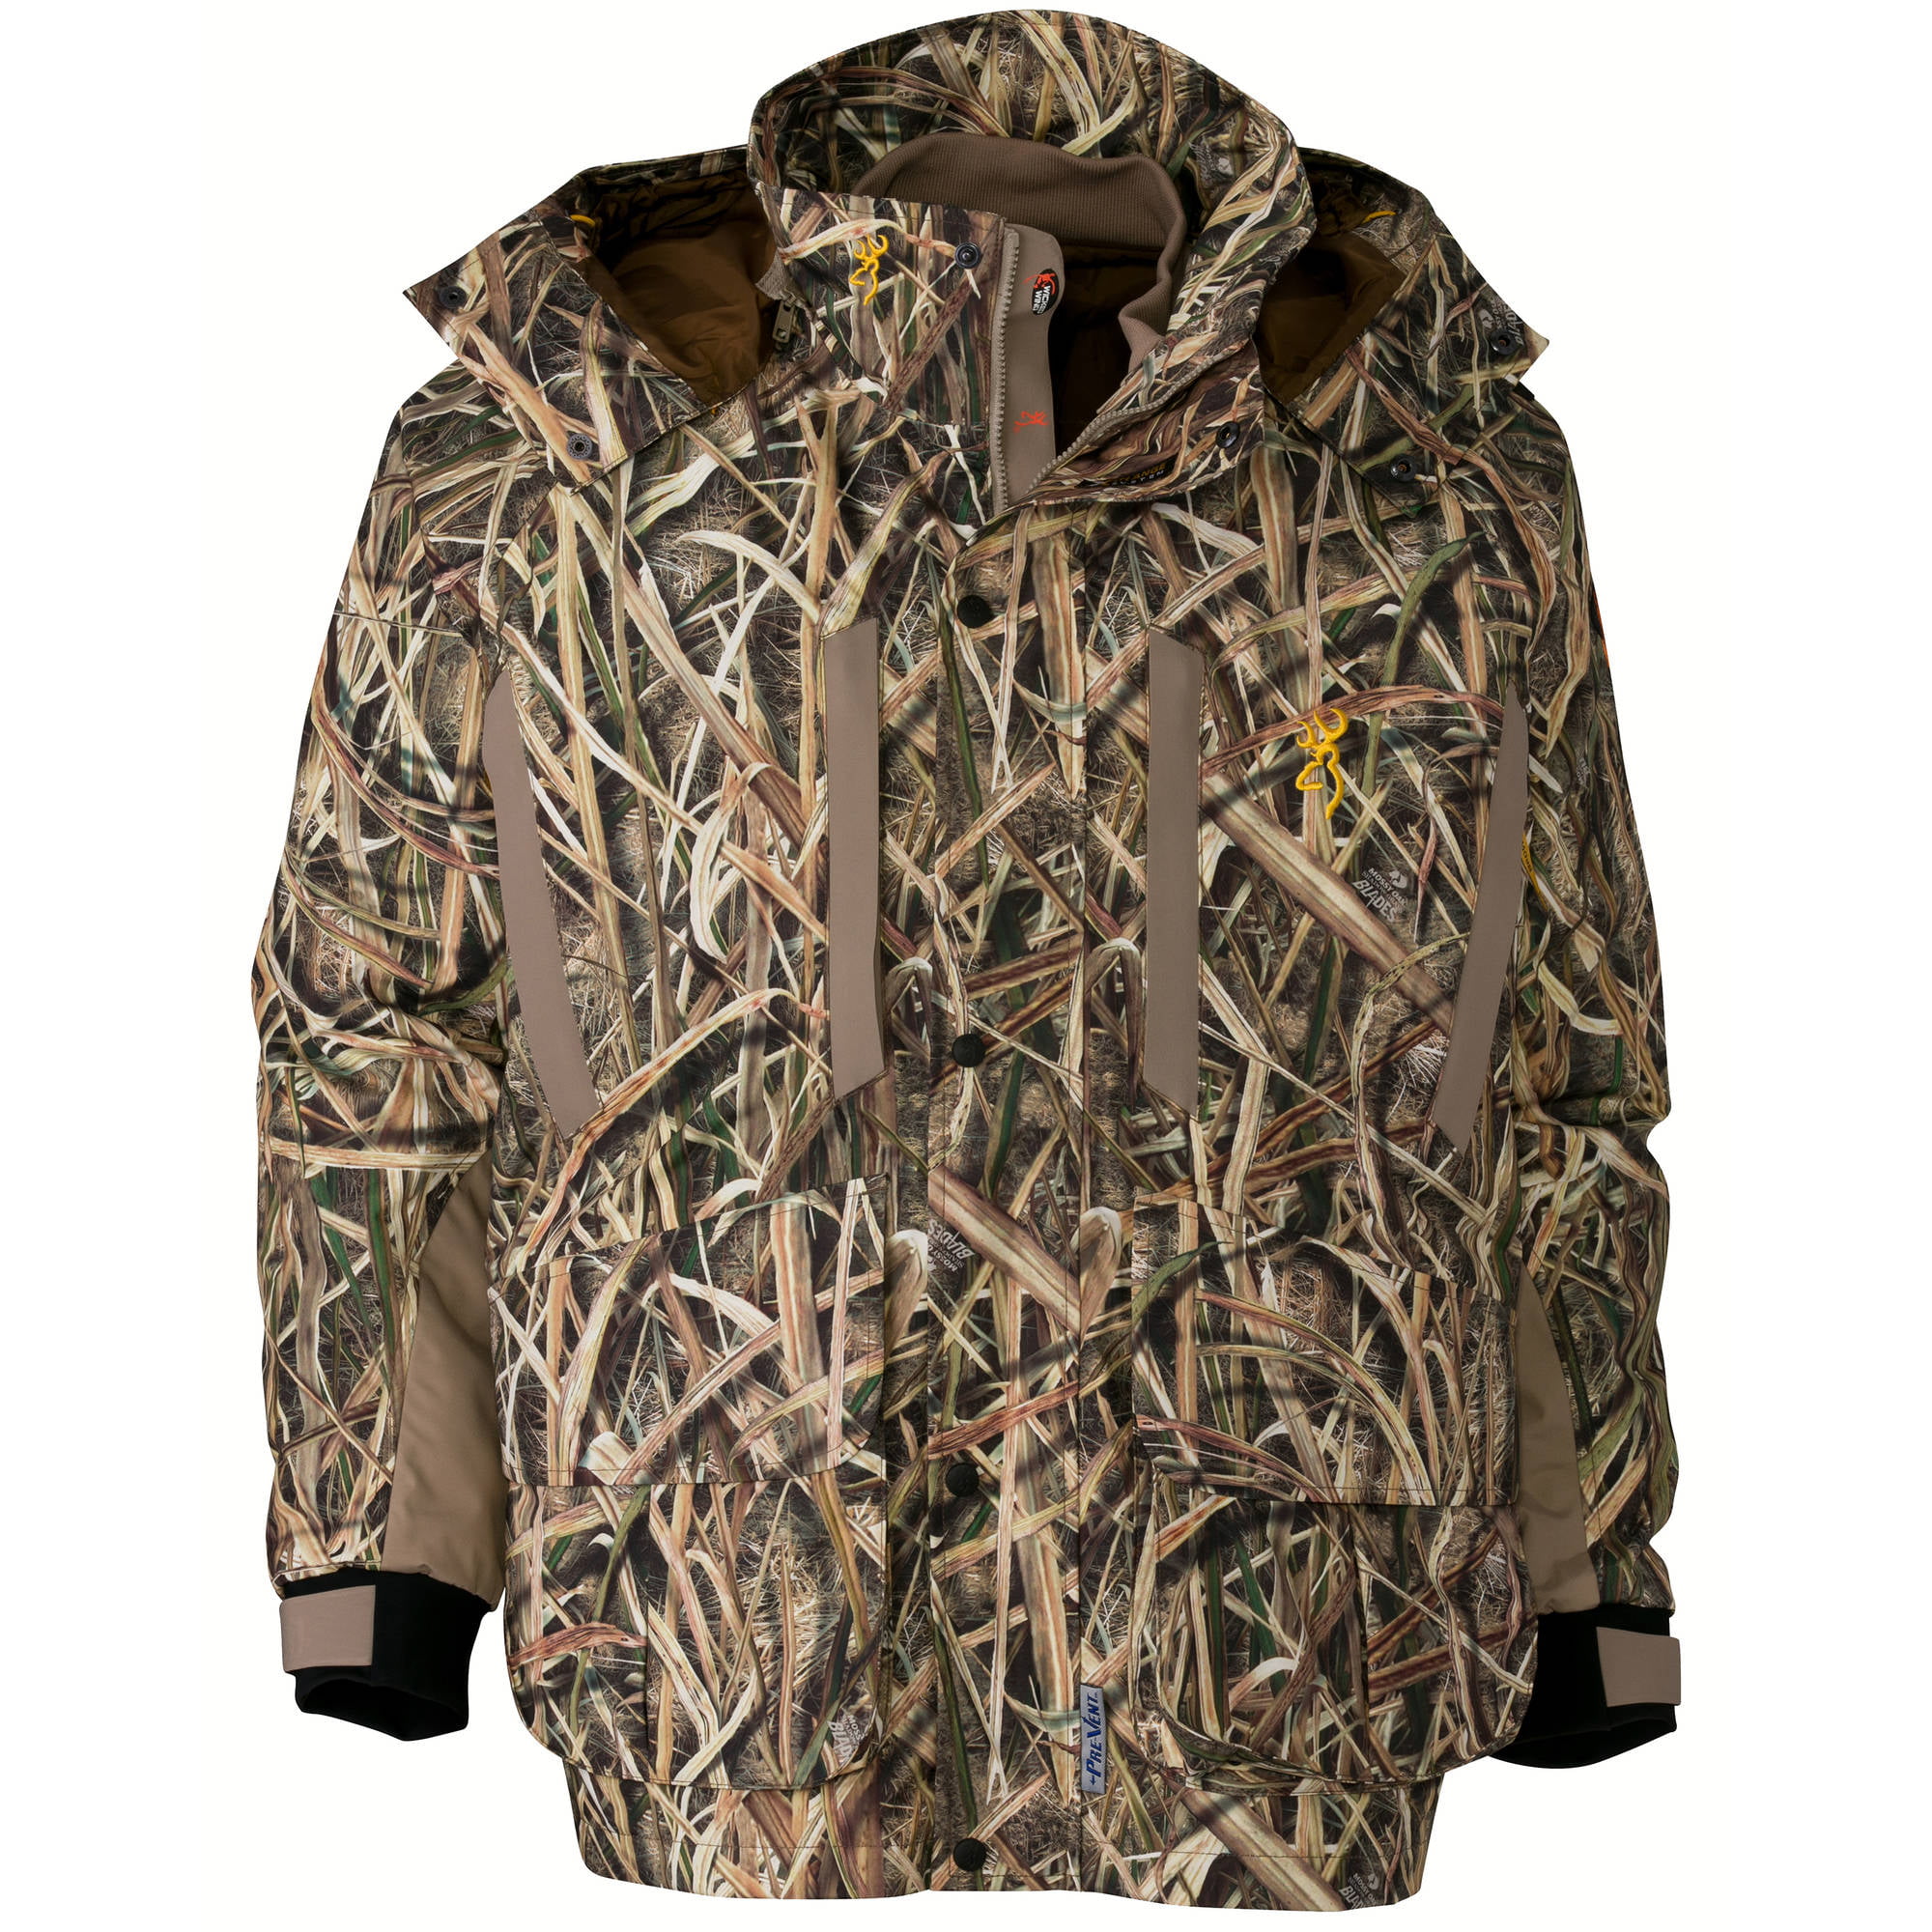 Max-5 Camo Details about   Browning Wicked Wing Soft Shell Pullover 3XL Duck Hunting Jacket 